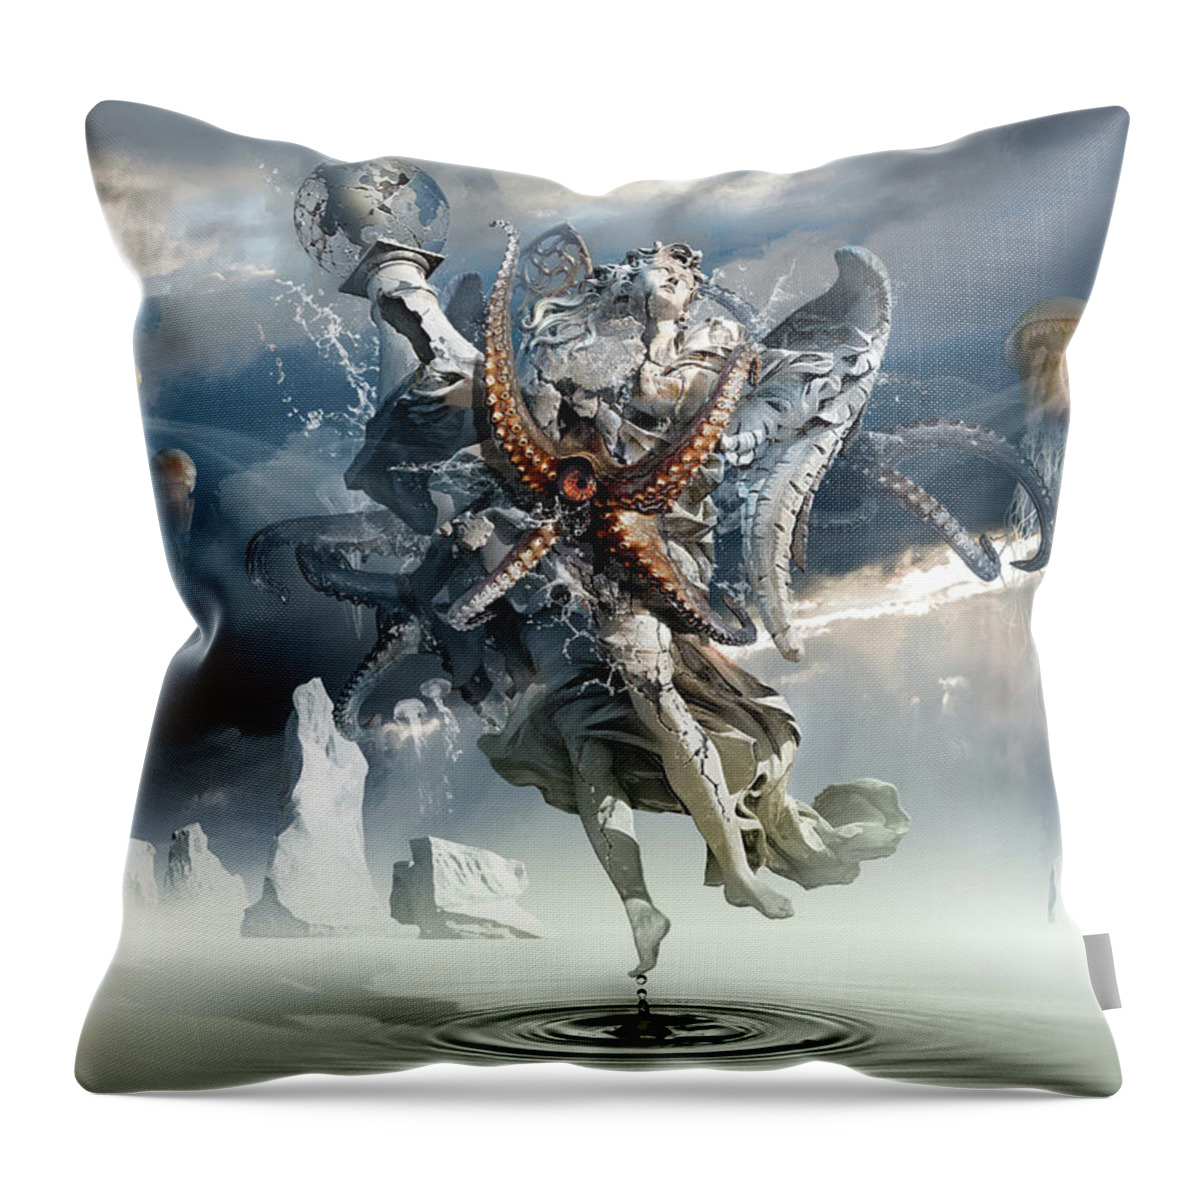 Imagination Throw Pillow featuring the digital art Walking on Water or Correlation of Dreams and Reality by George Grie